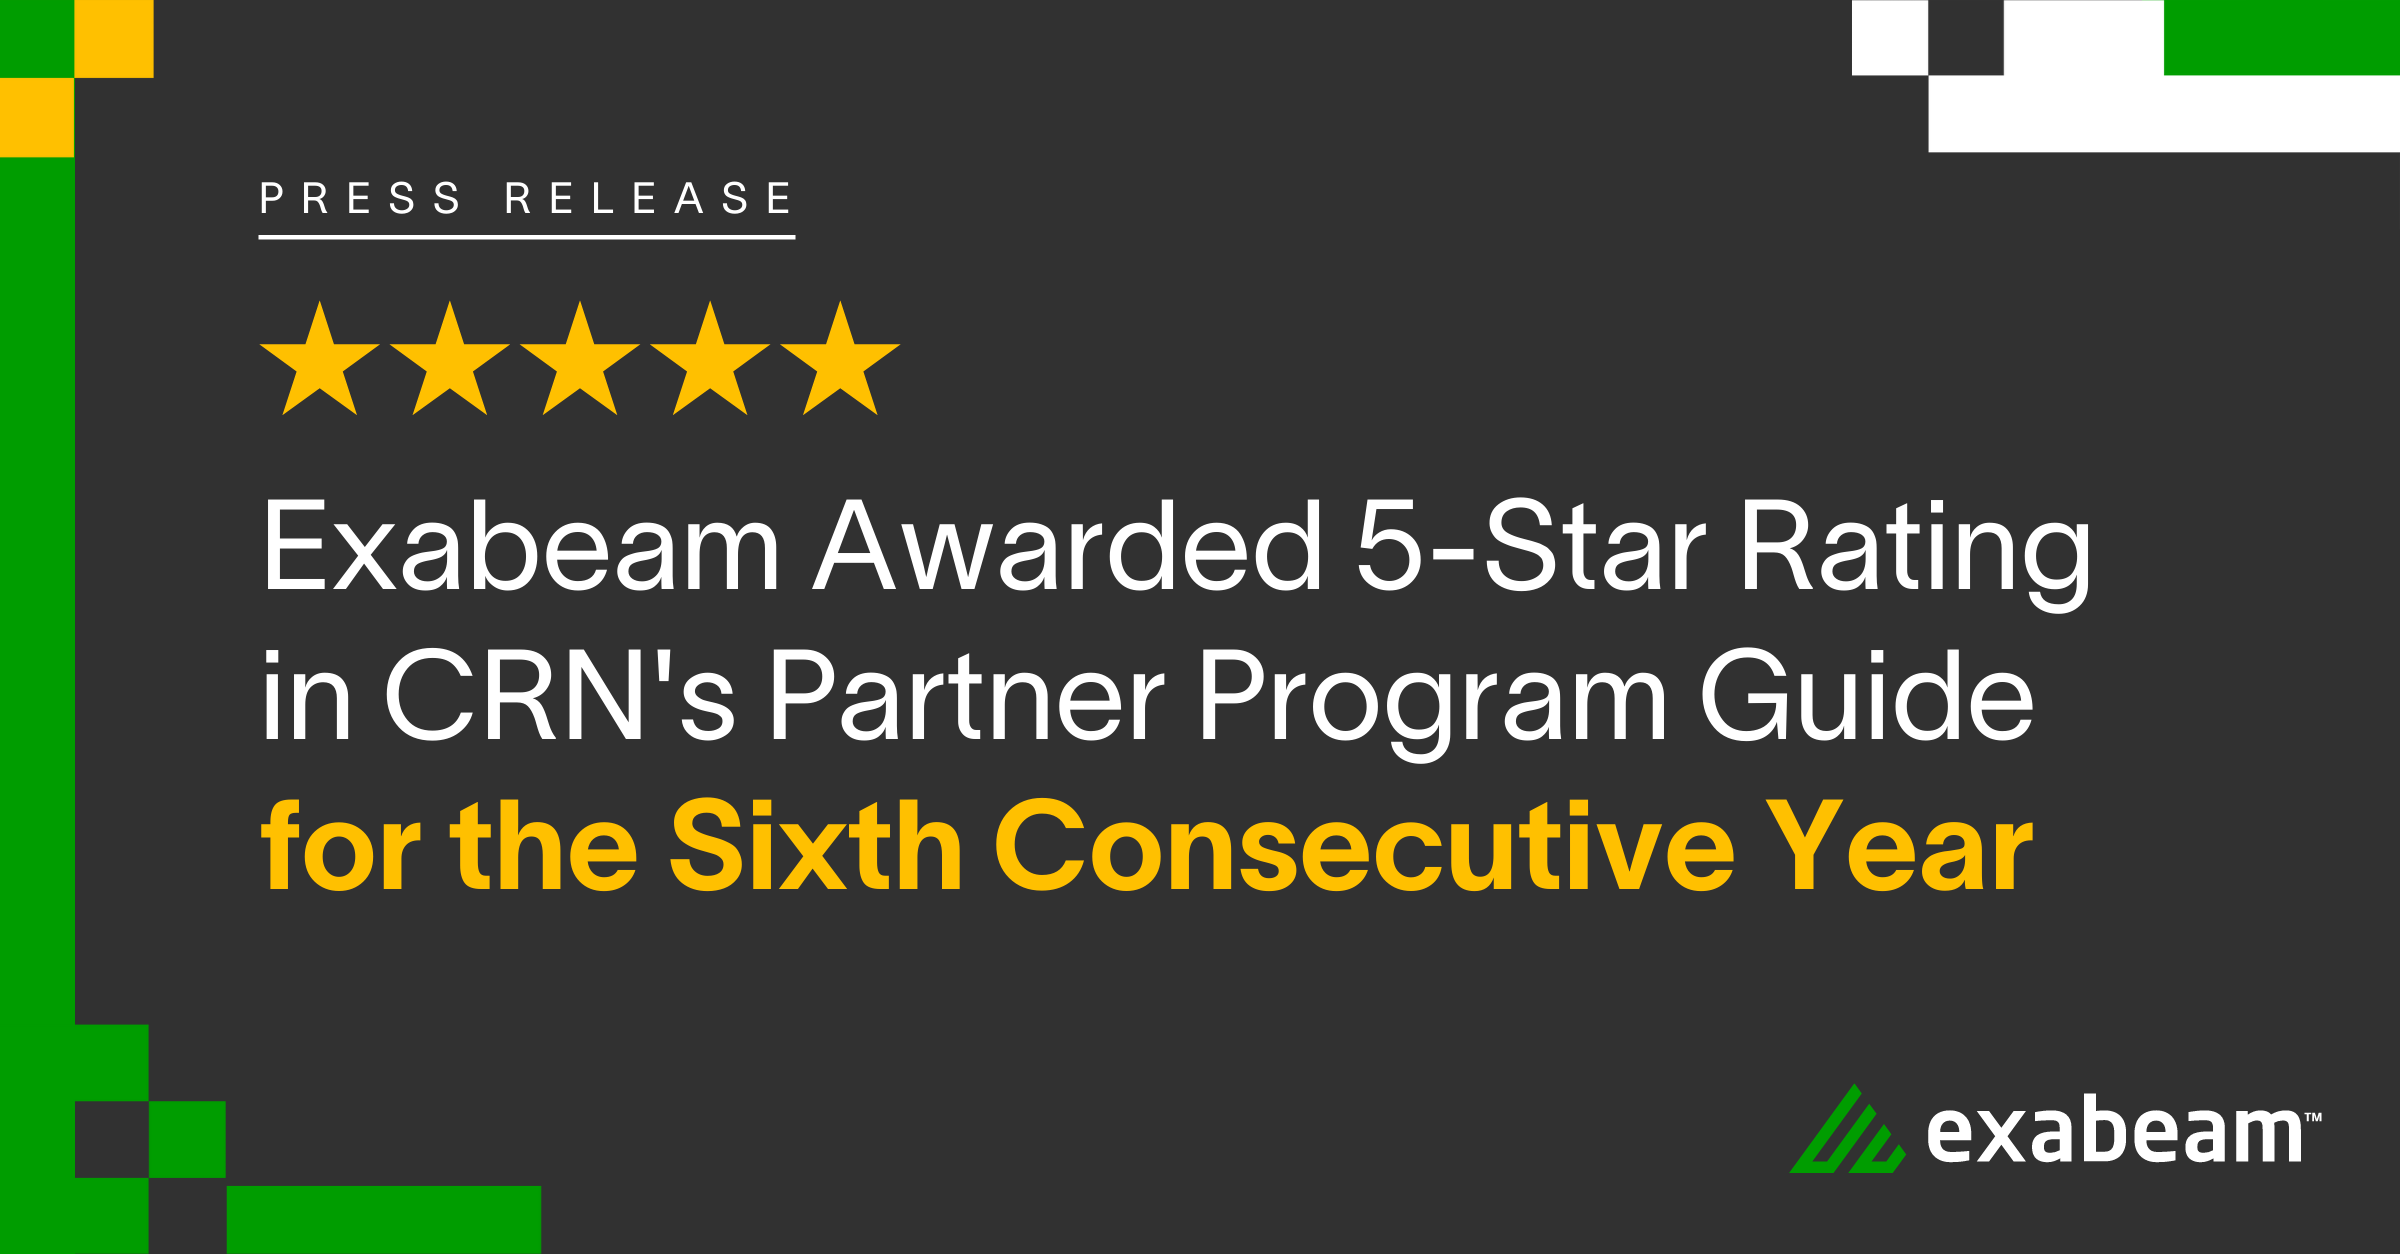 Exabeam Awarded 5-Star Rating in CRN’s Partner Program Guide for Sixth Consecutive Year